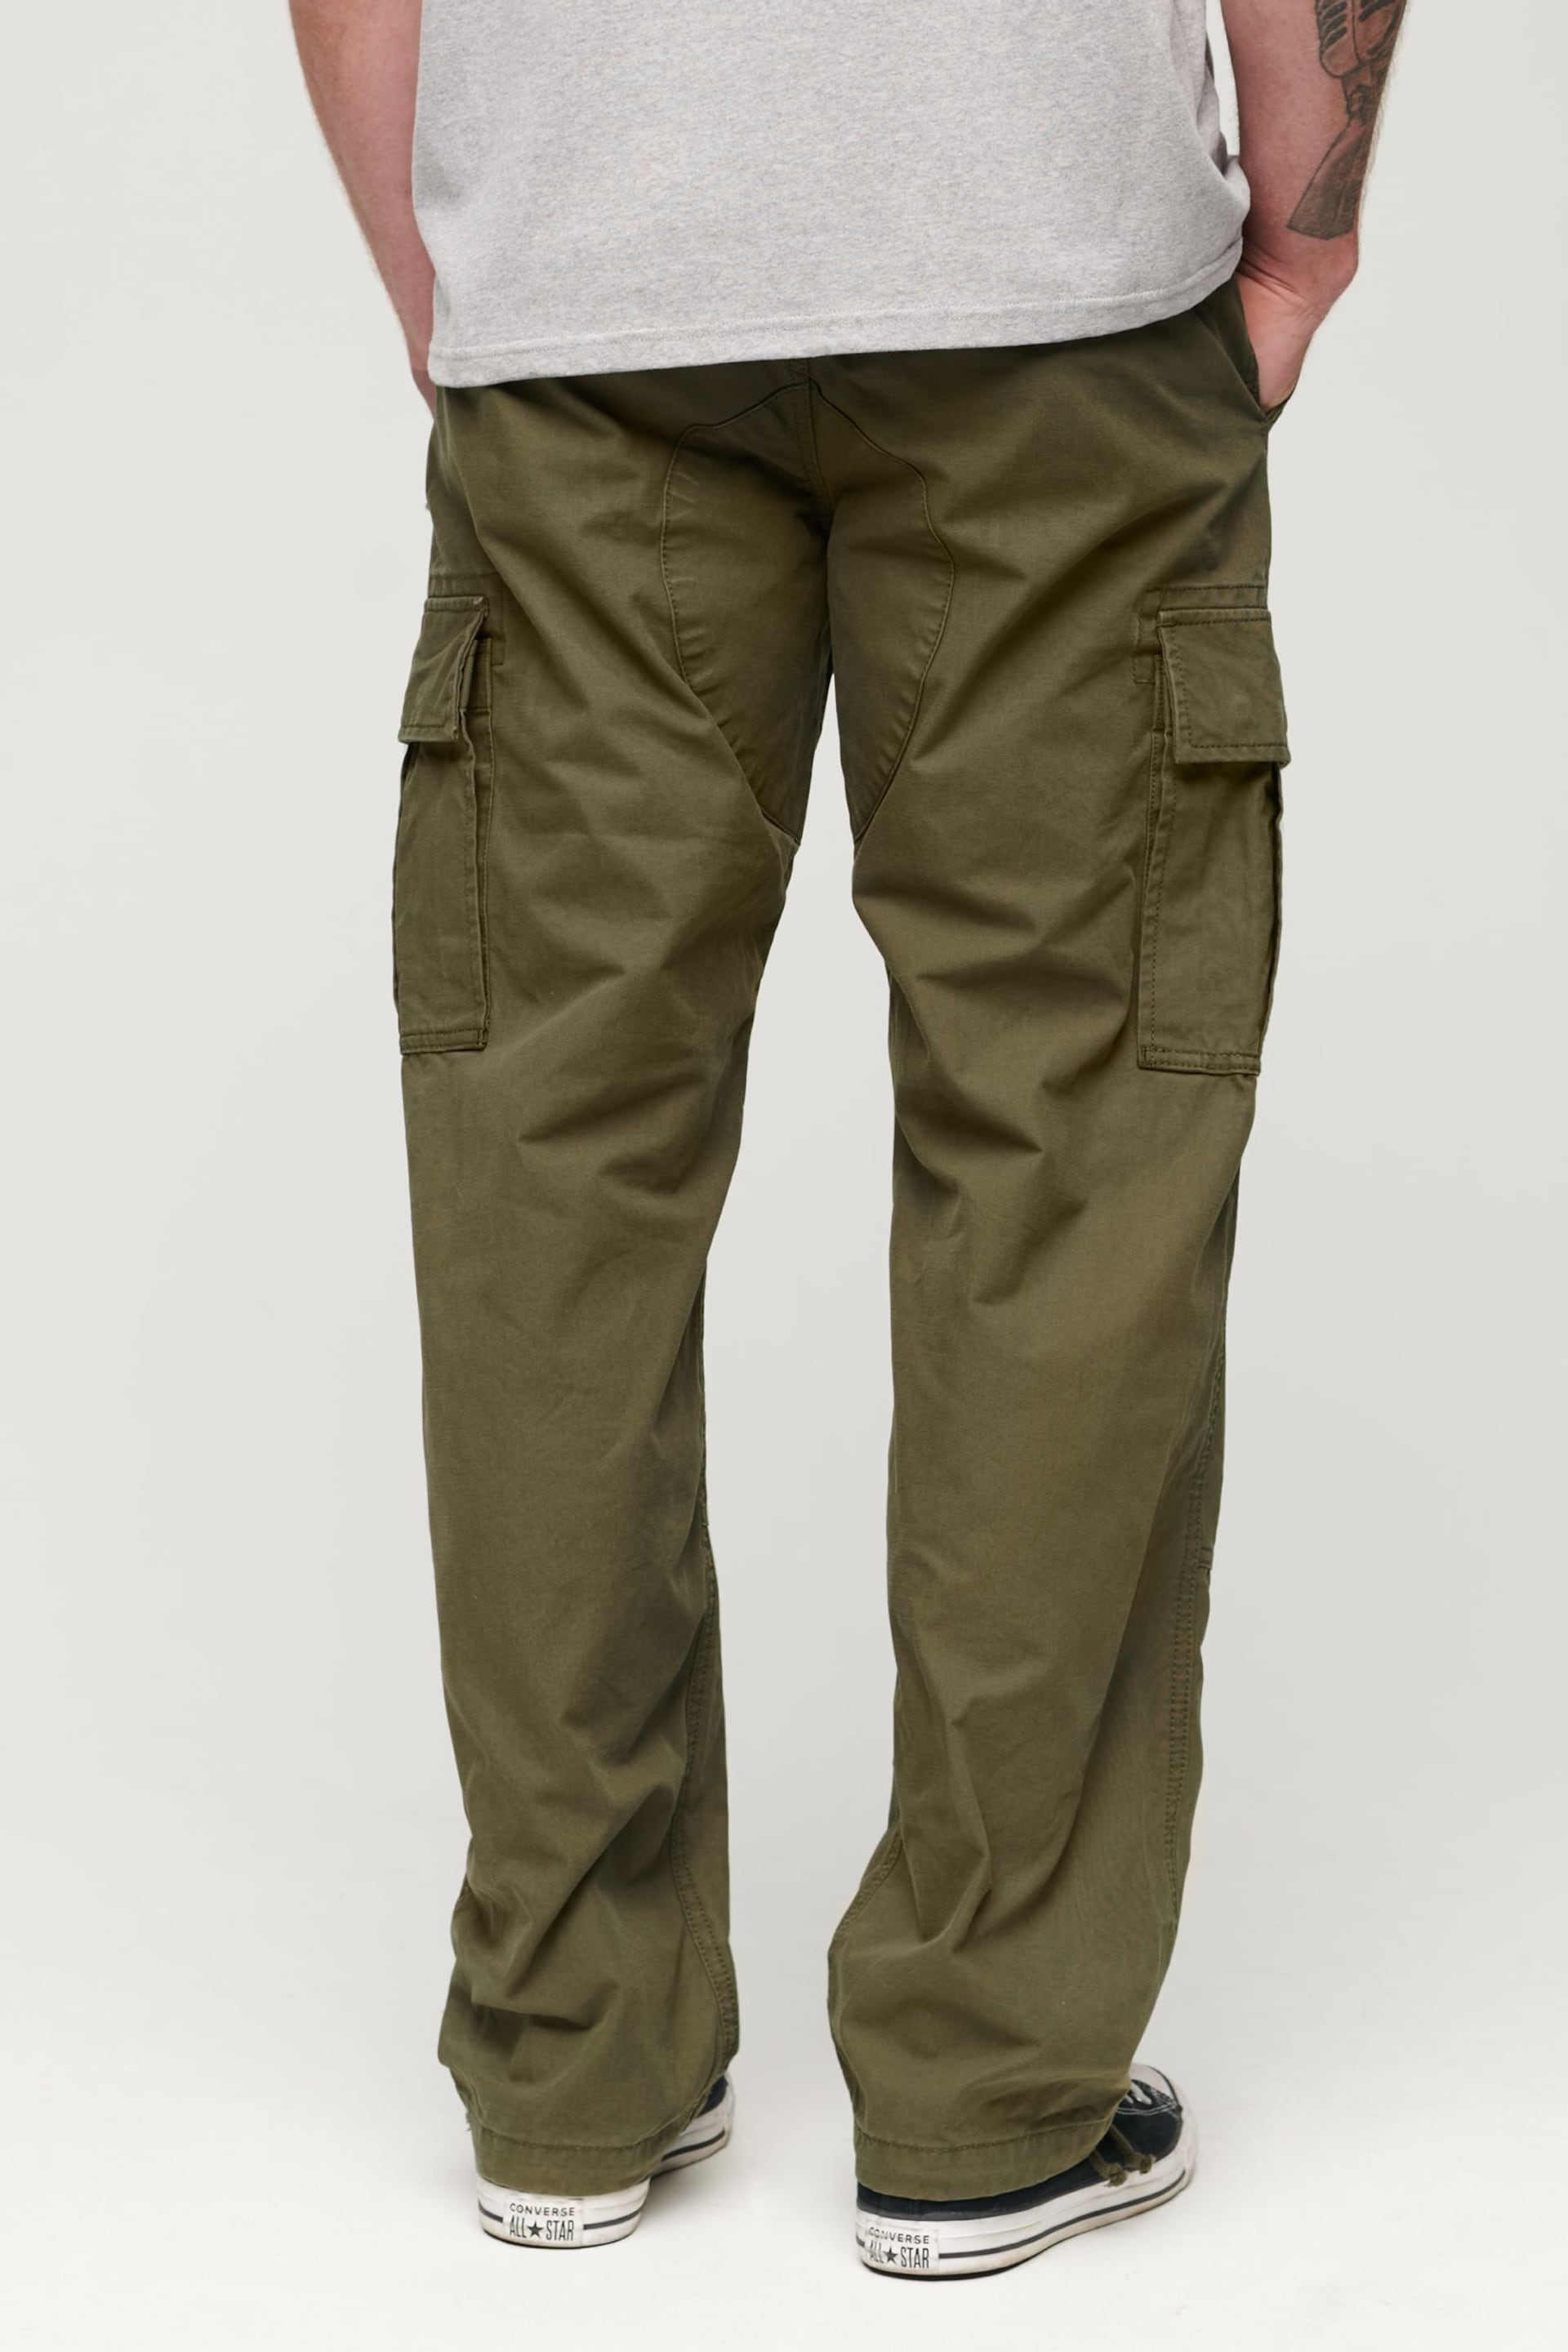 Superdry Green Baggy Cargo Trousers - Image 2 of 7